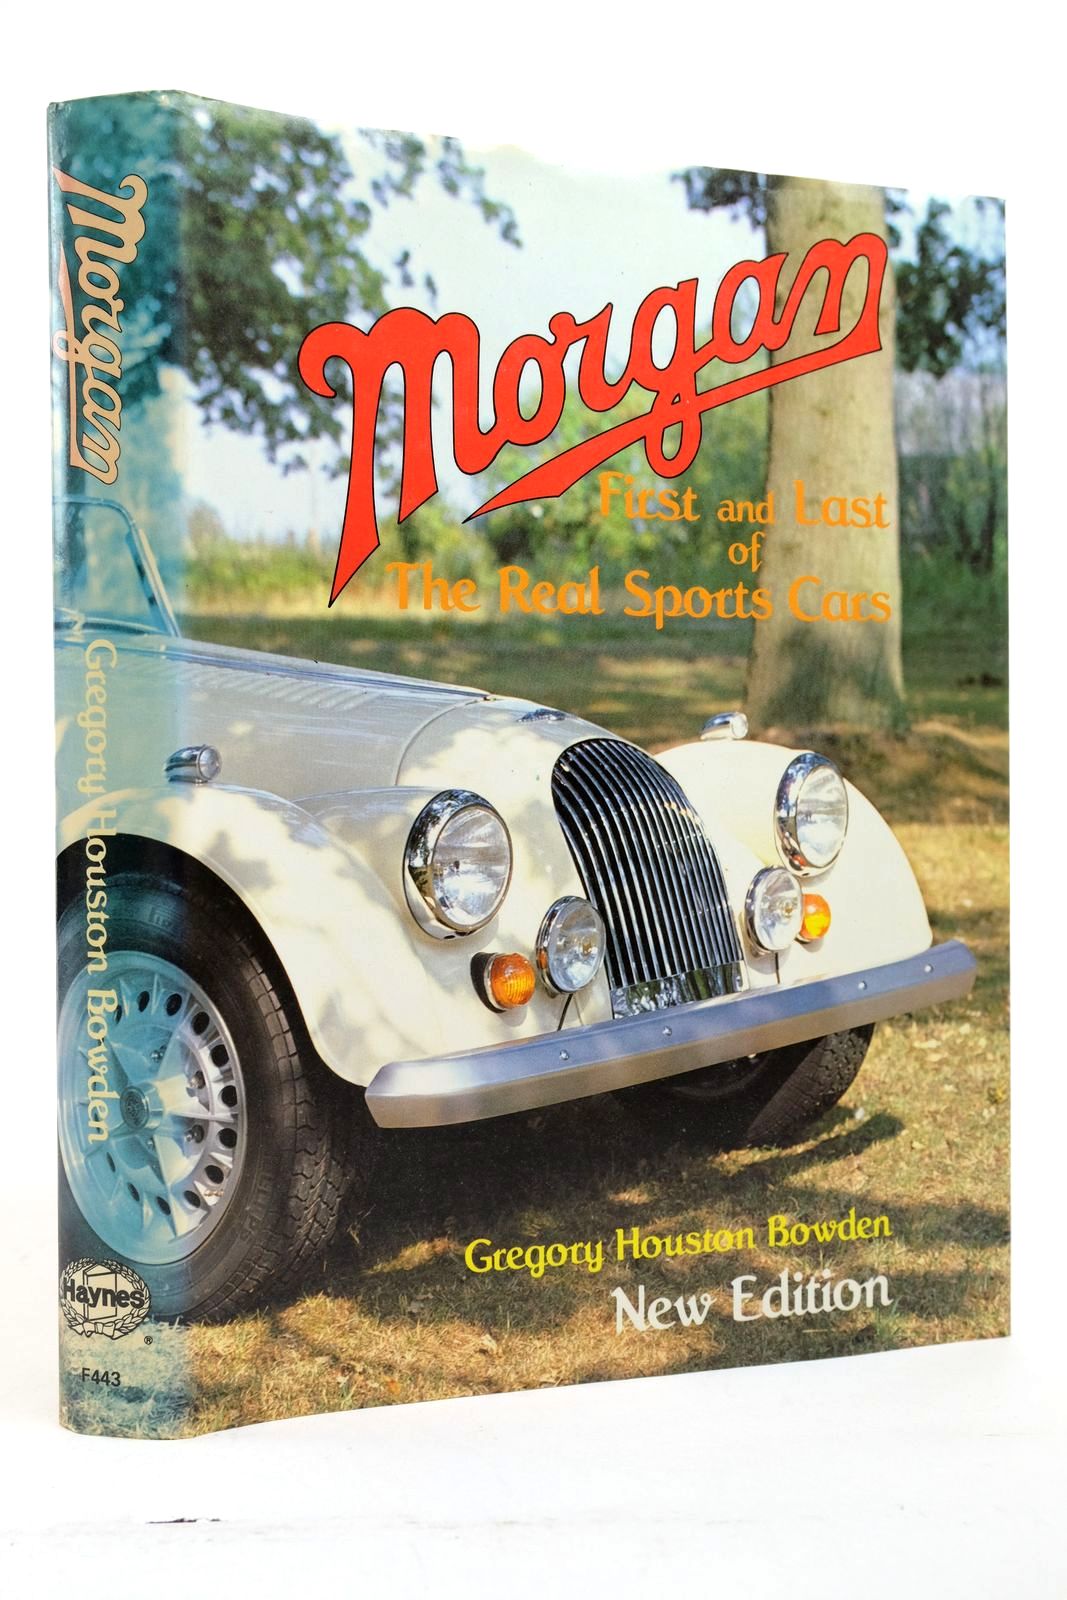 Photo of MORGAN: FIRST AND LAST OF THE REAL SPORTS CARS written by Bowden, Gregory Houston published by Foulis, Haynes (STOCK CODE: 2139539)  for sale by Stella & Rose's Books